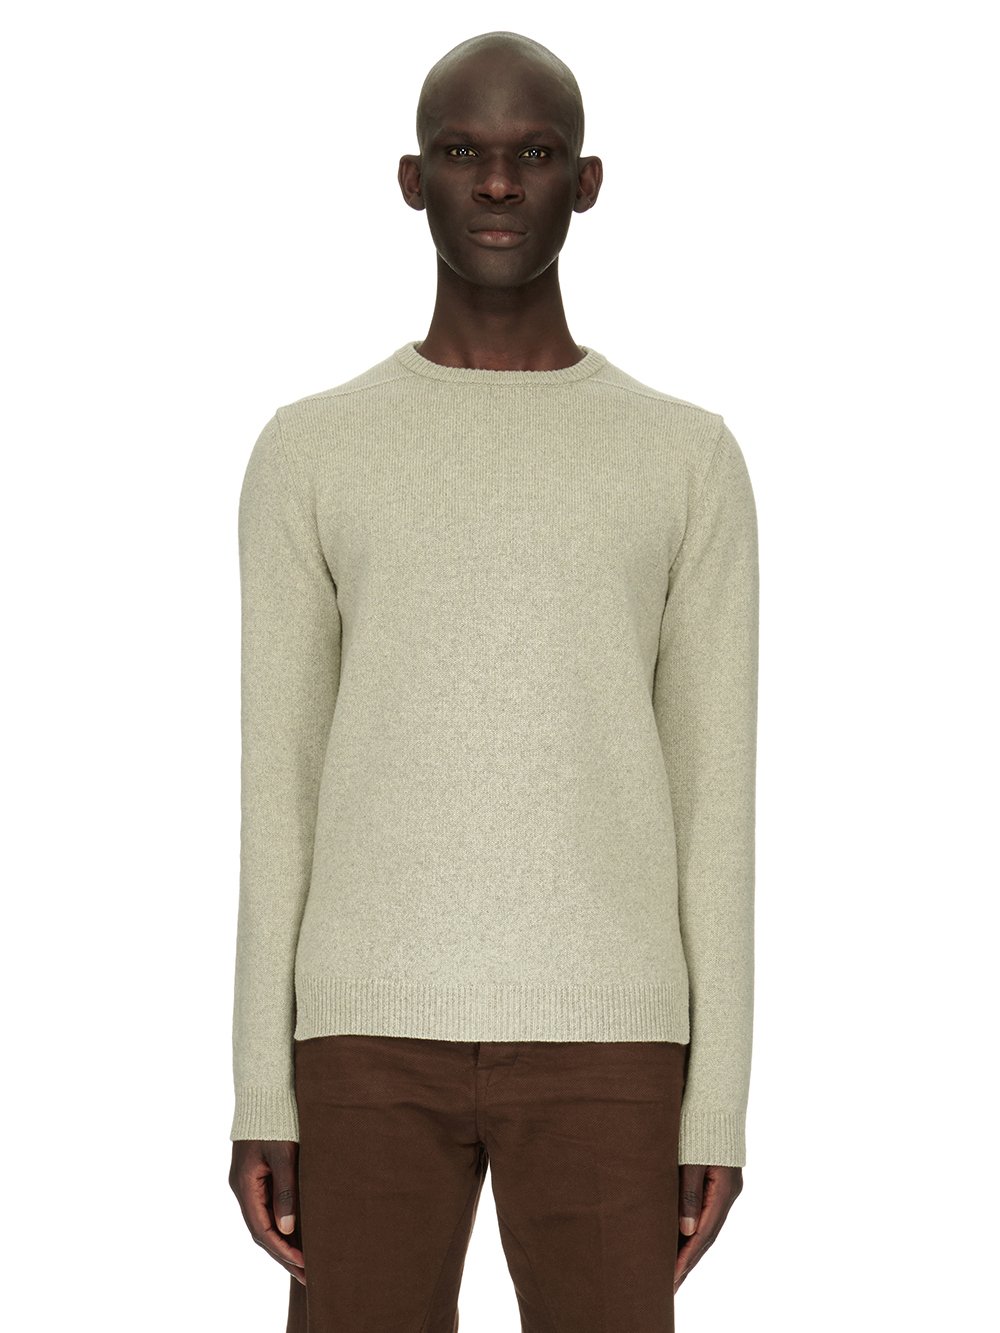 RICK OWENS FW23 LUXOR BIKER ROUND NECK IN PEARL RECYCLED CASHMERE KNIT